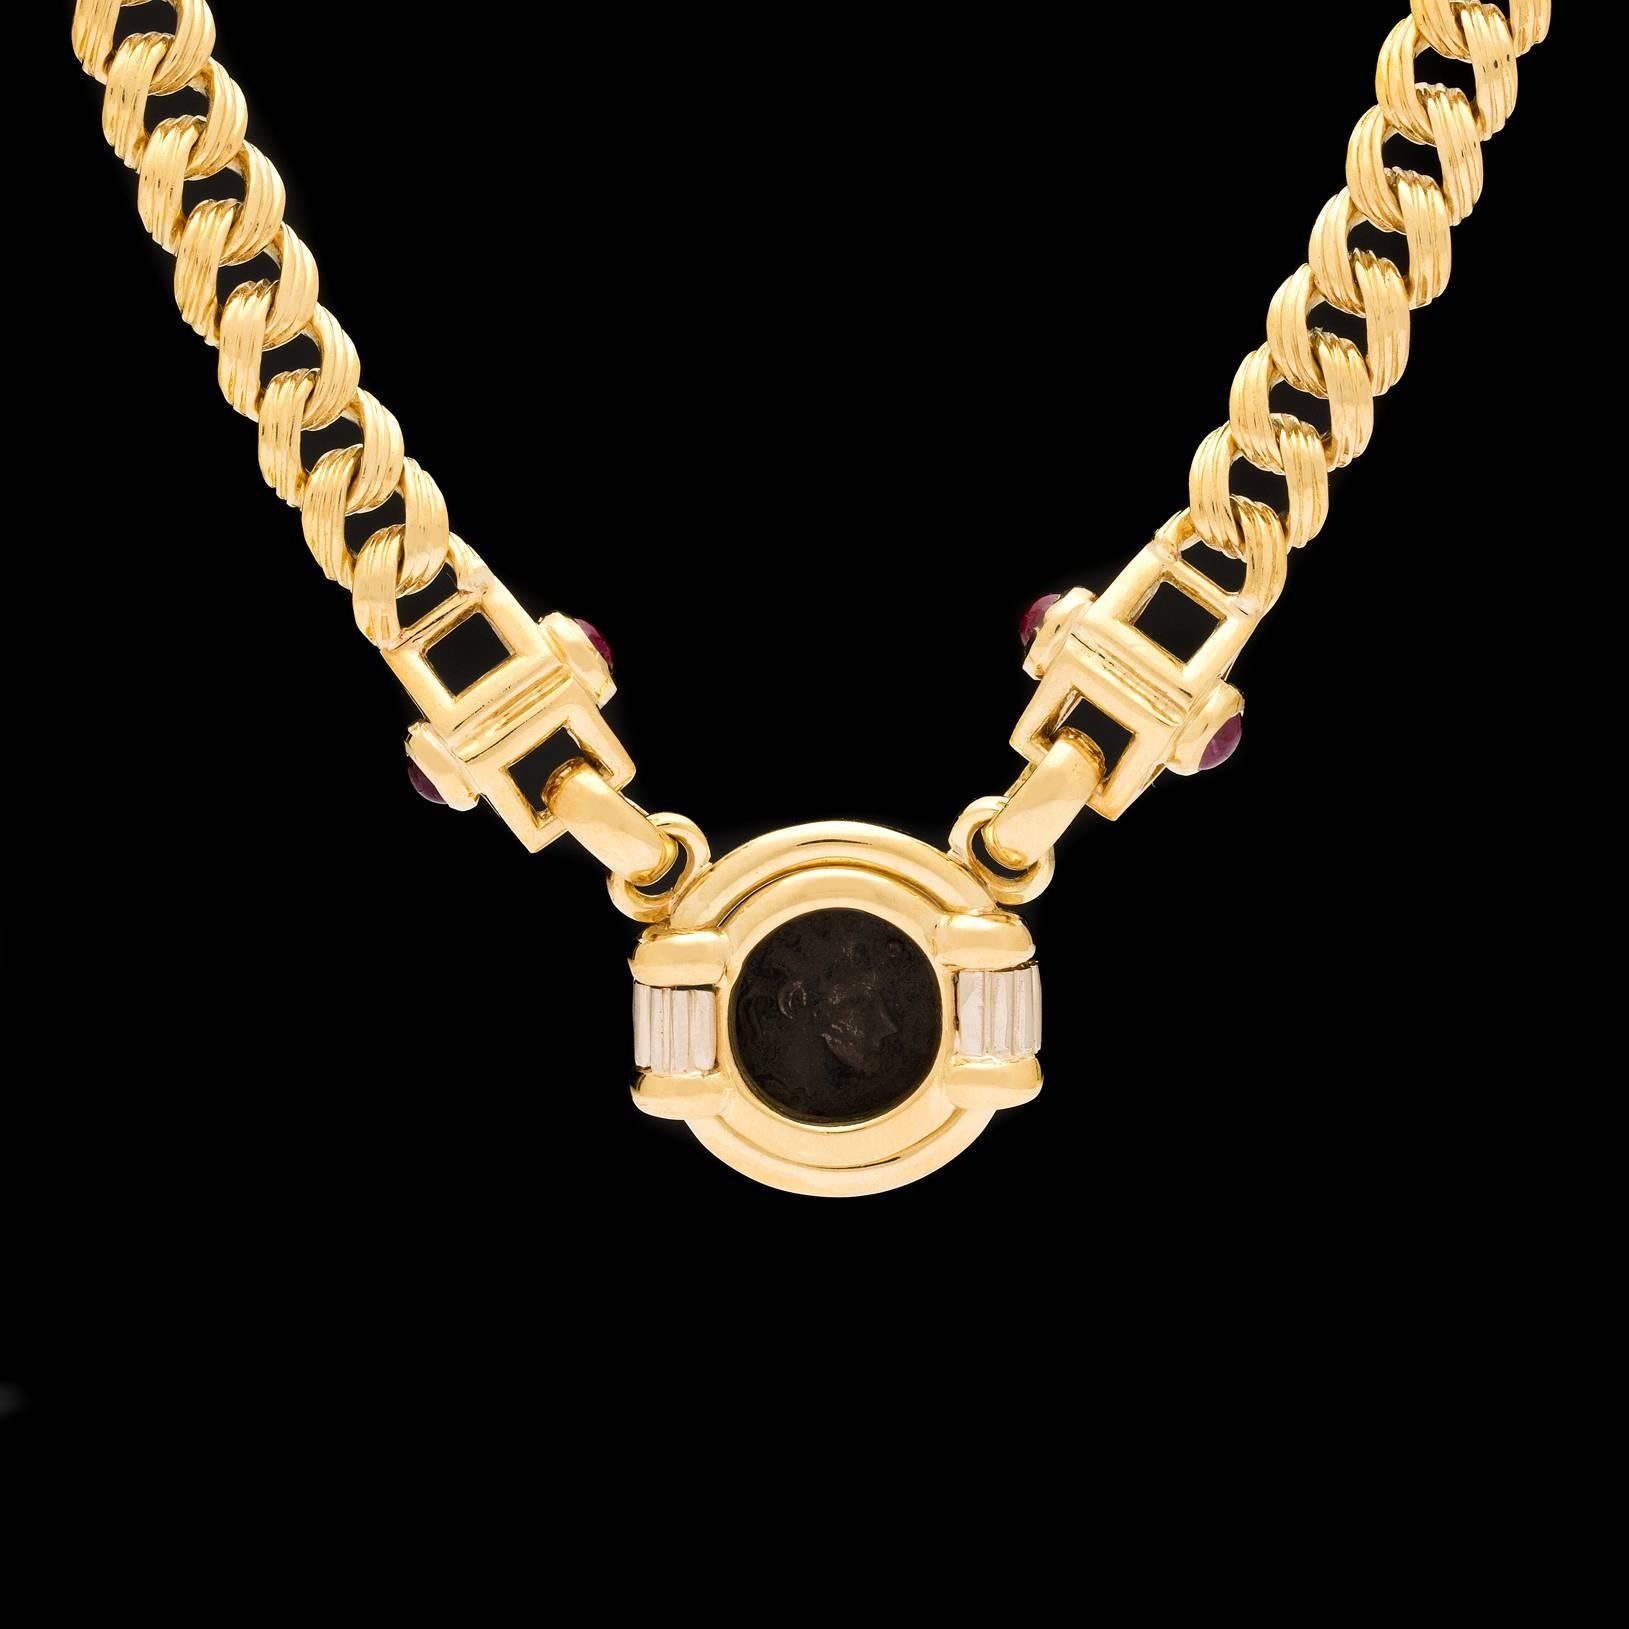 Estate 18k yellow gold necklace features a Roman Coin suspended by links detailed with 4 ruby cabochons on a two-toned textured flat curb link chain of 15 inches.  Total weight of the necklace is 53.1 grams.